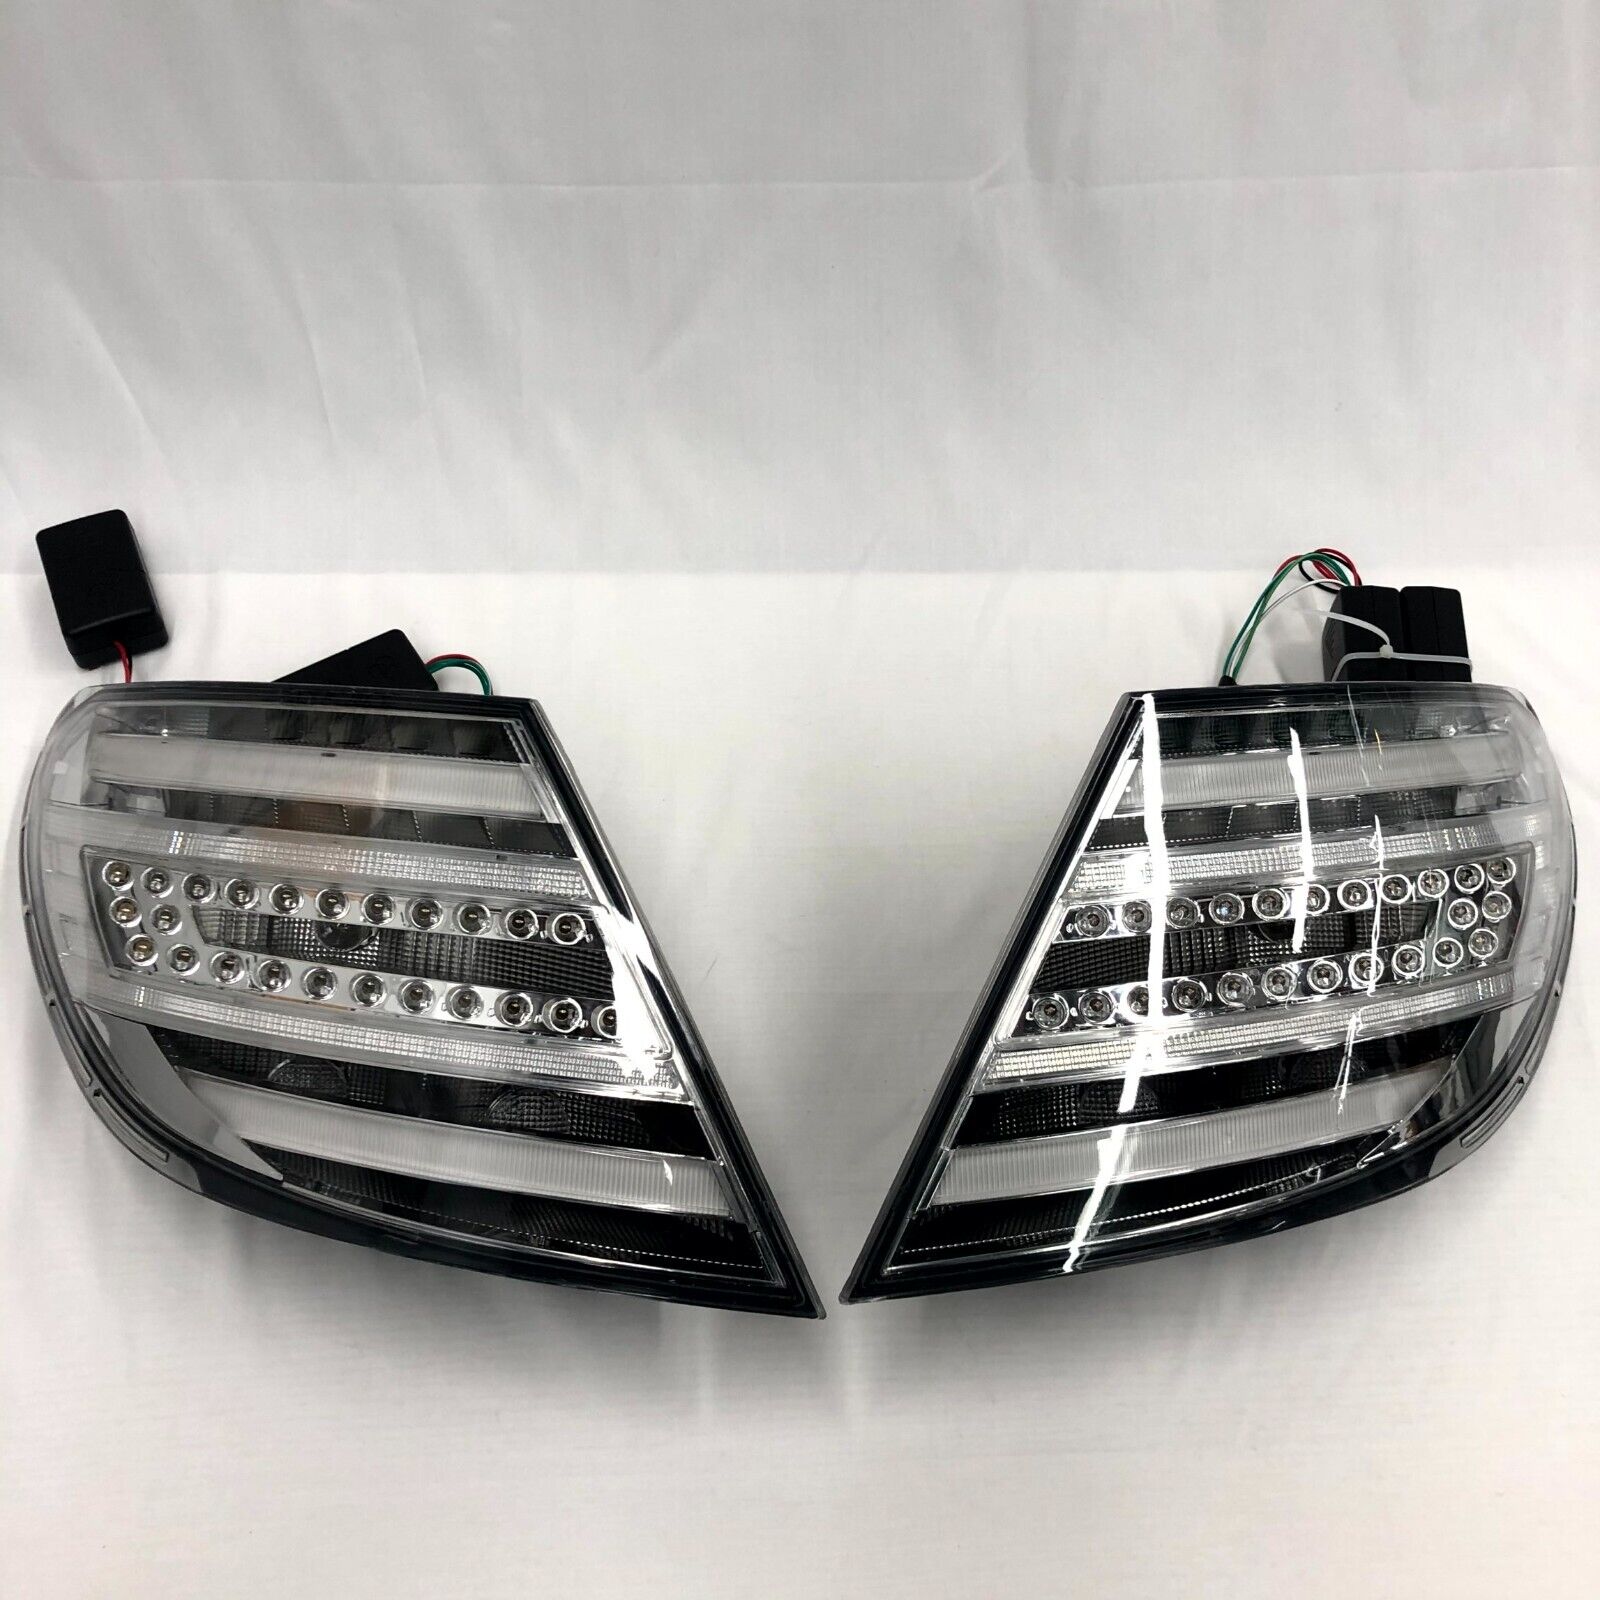 W204 Facelift Tail Lights Lamp Pair for Mercedes Benz C Class C250 C300  Smoke